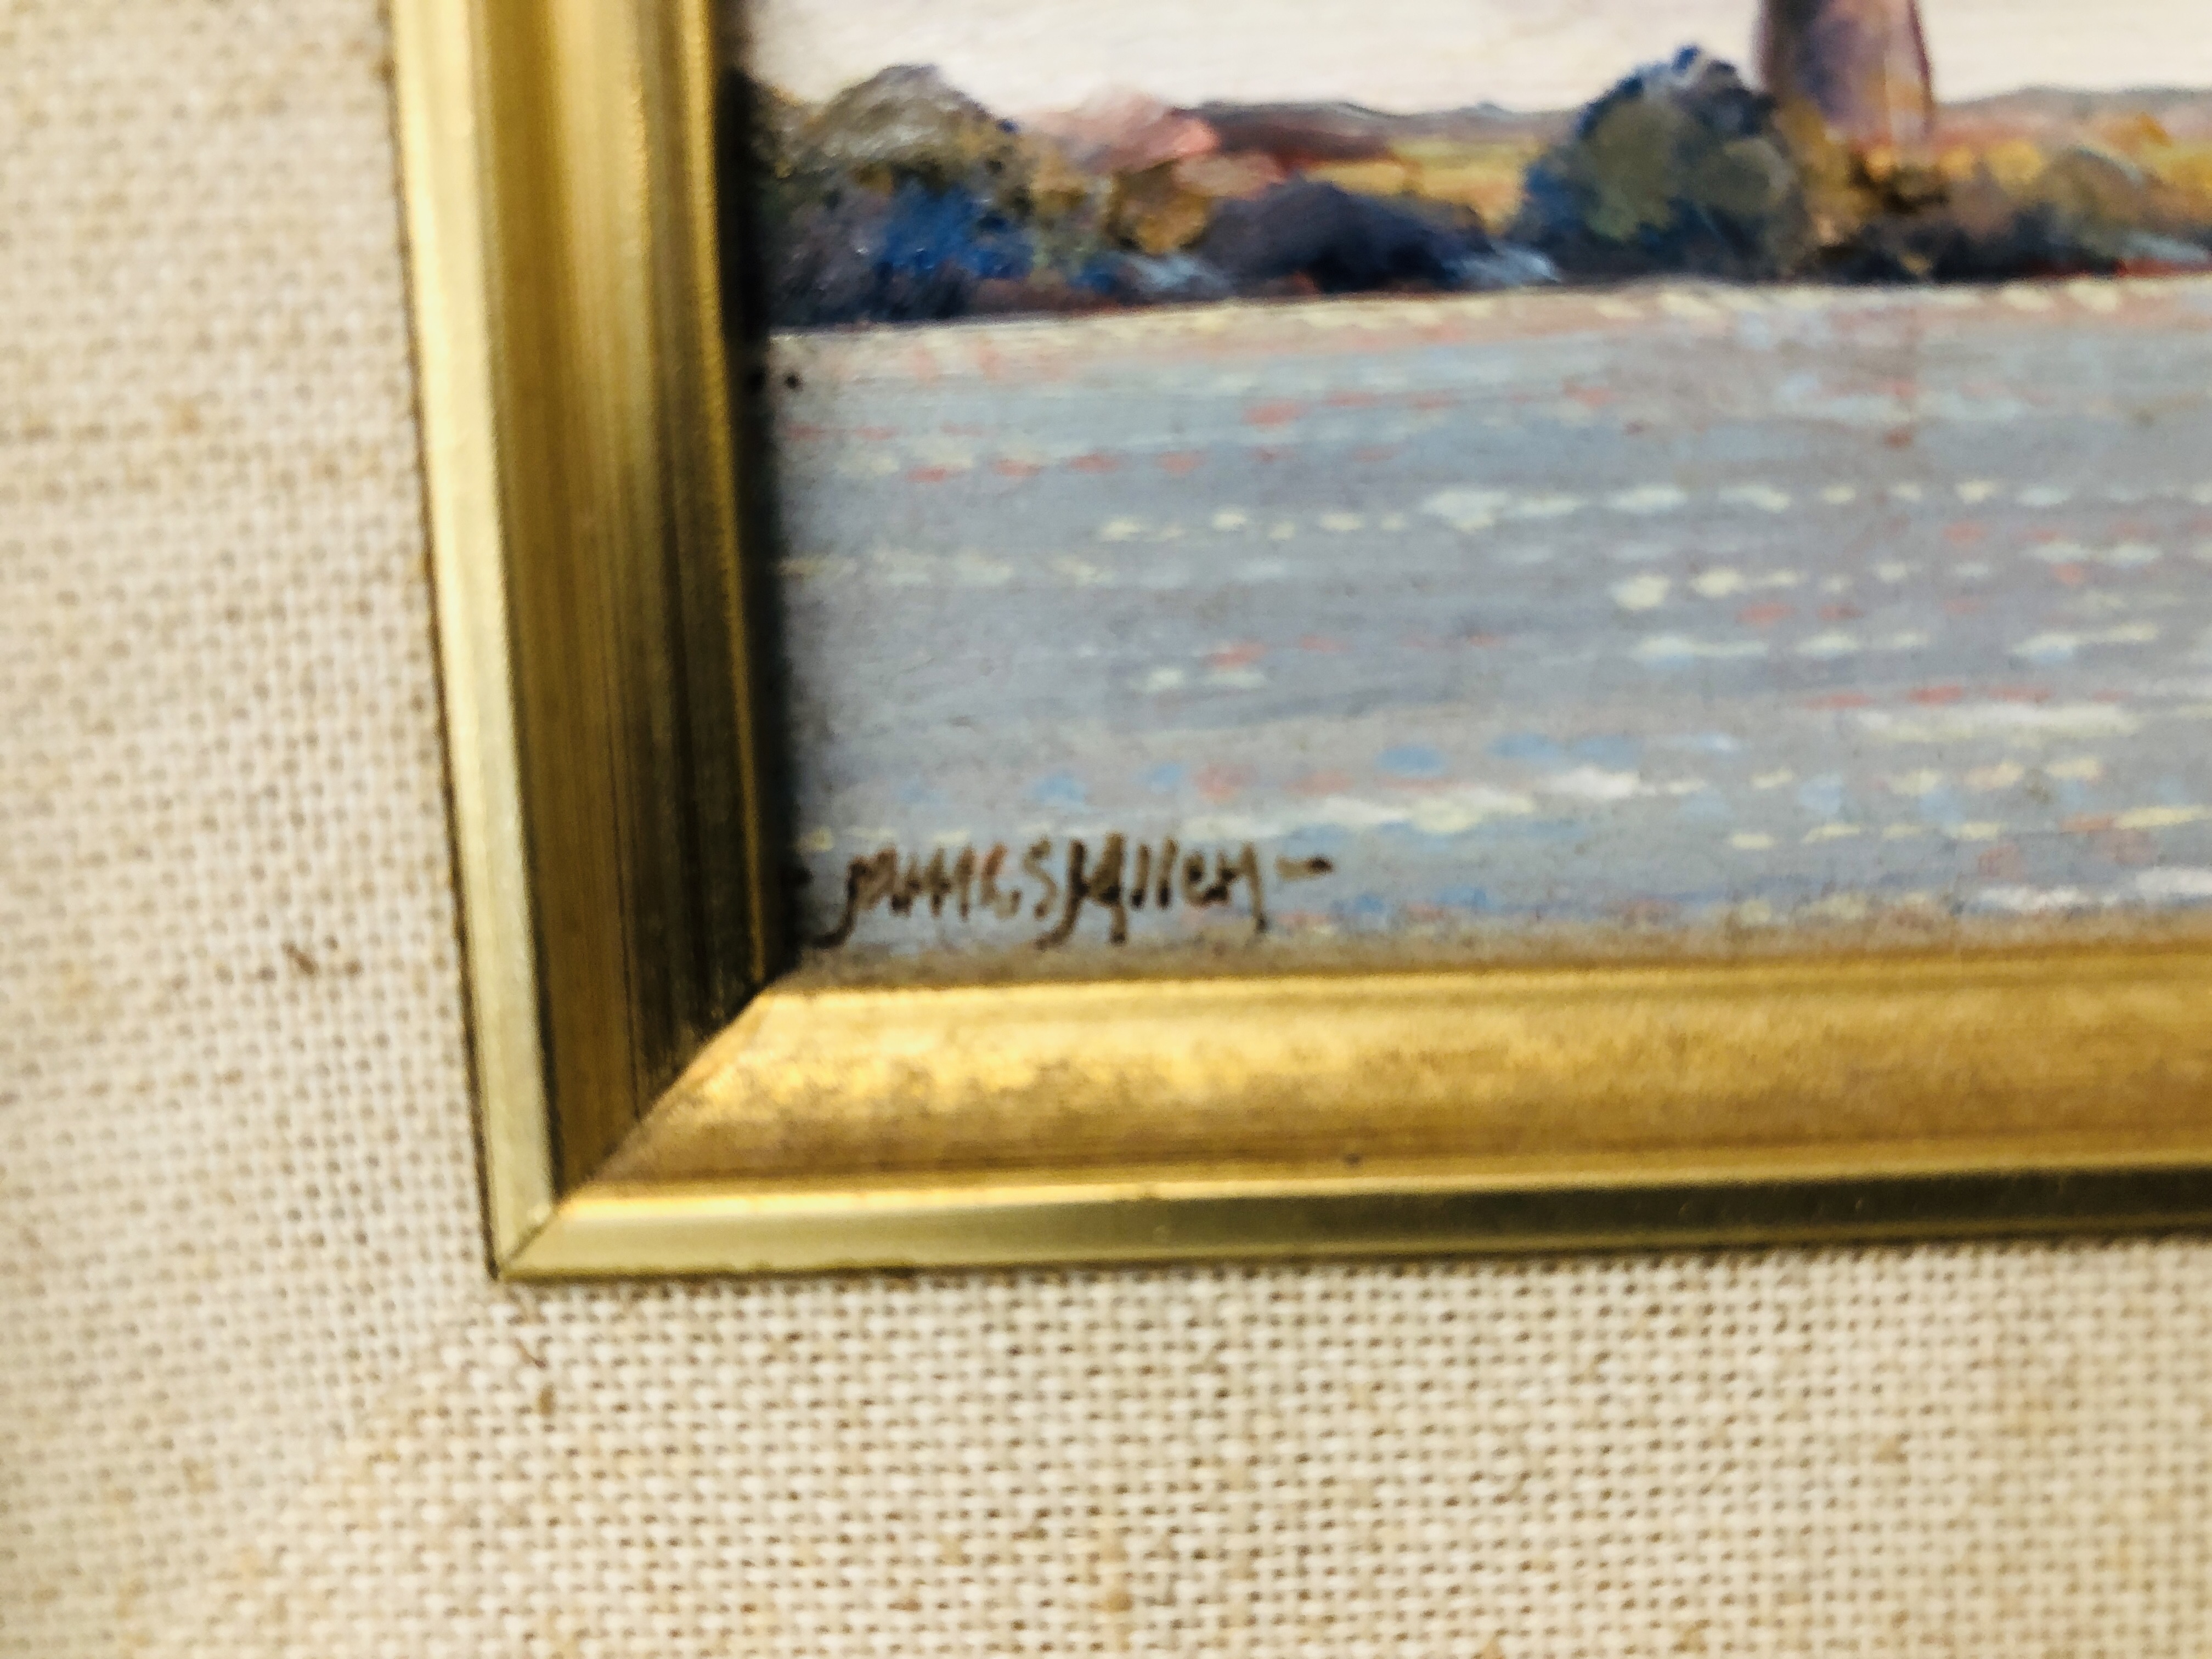 TWO ORIGINAL JAMES ALLEN OIL ON BOARDS "NORFOLK WHERRY" AND "MILL NR. HICKLING" NORFOLK - EACH 11. - Image 3 of 8